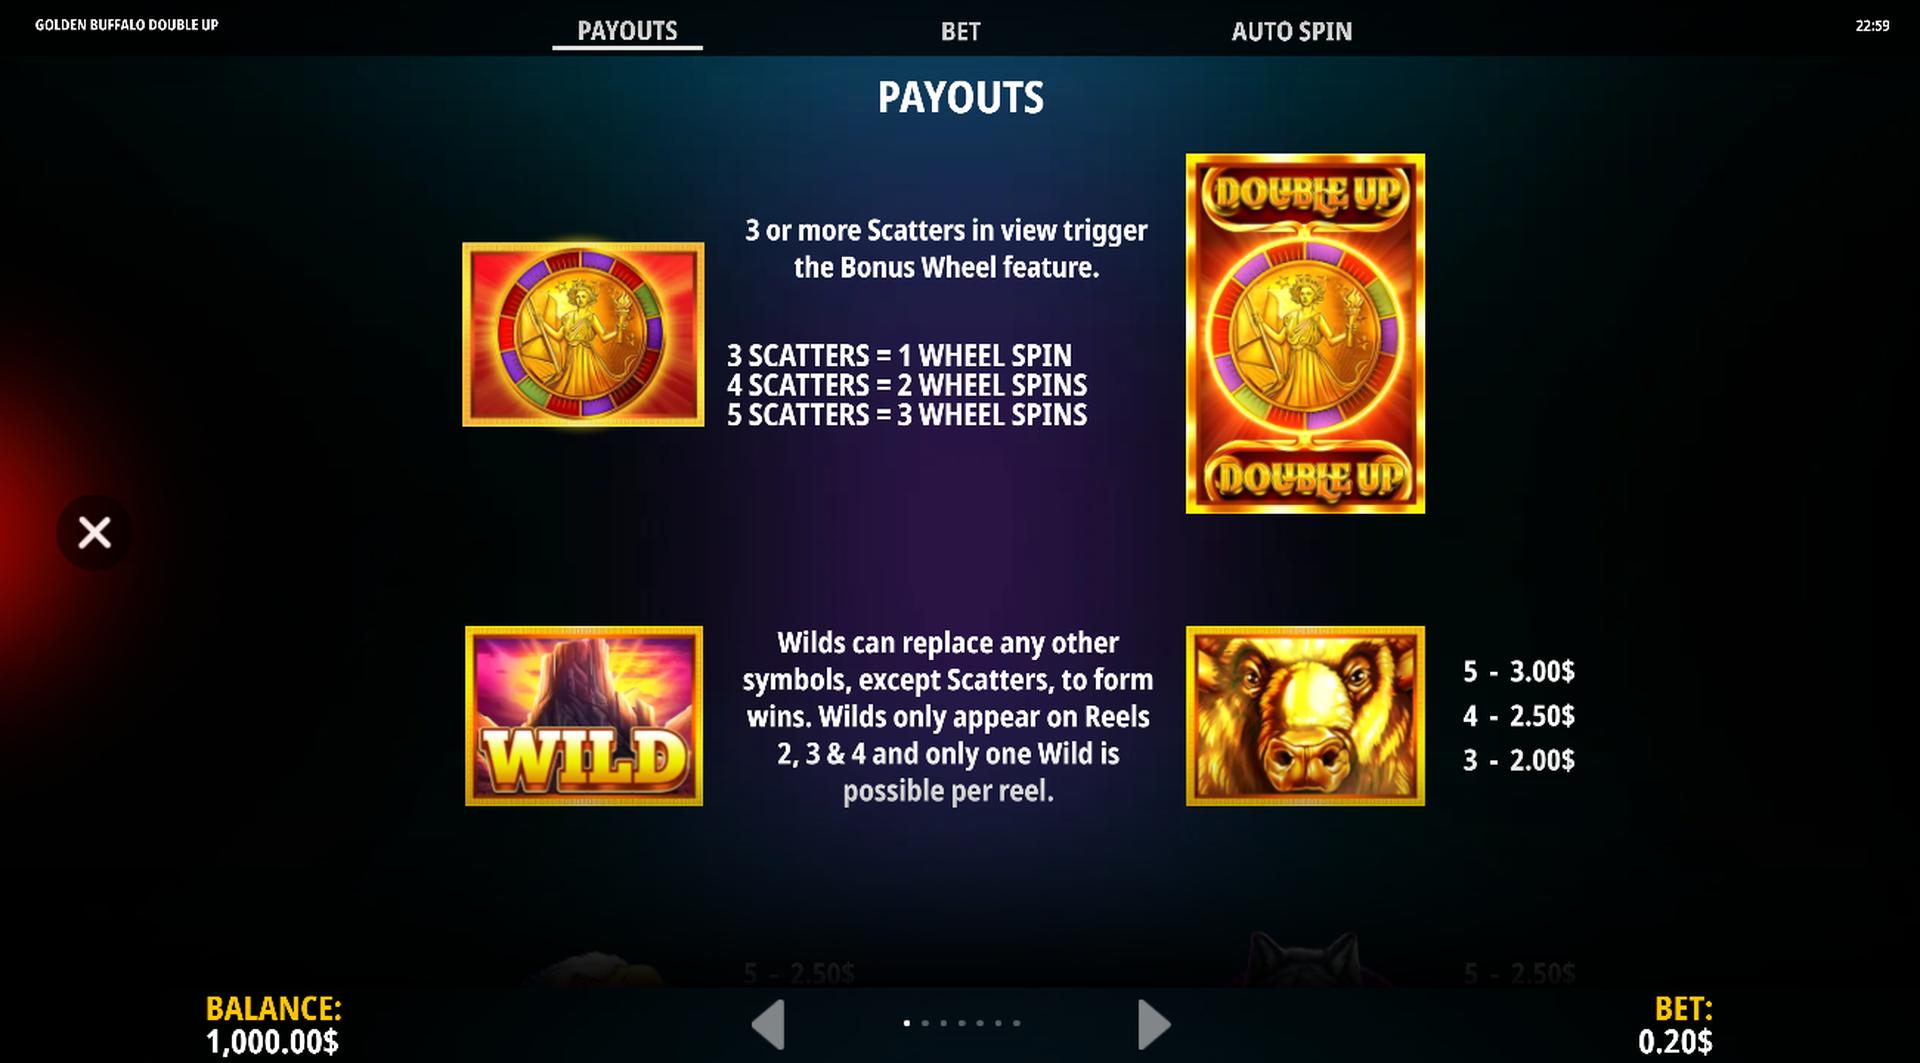 Conservative Strategy for the Golden Buffalo Double Up Slot